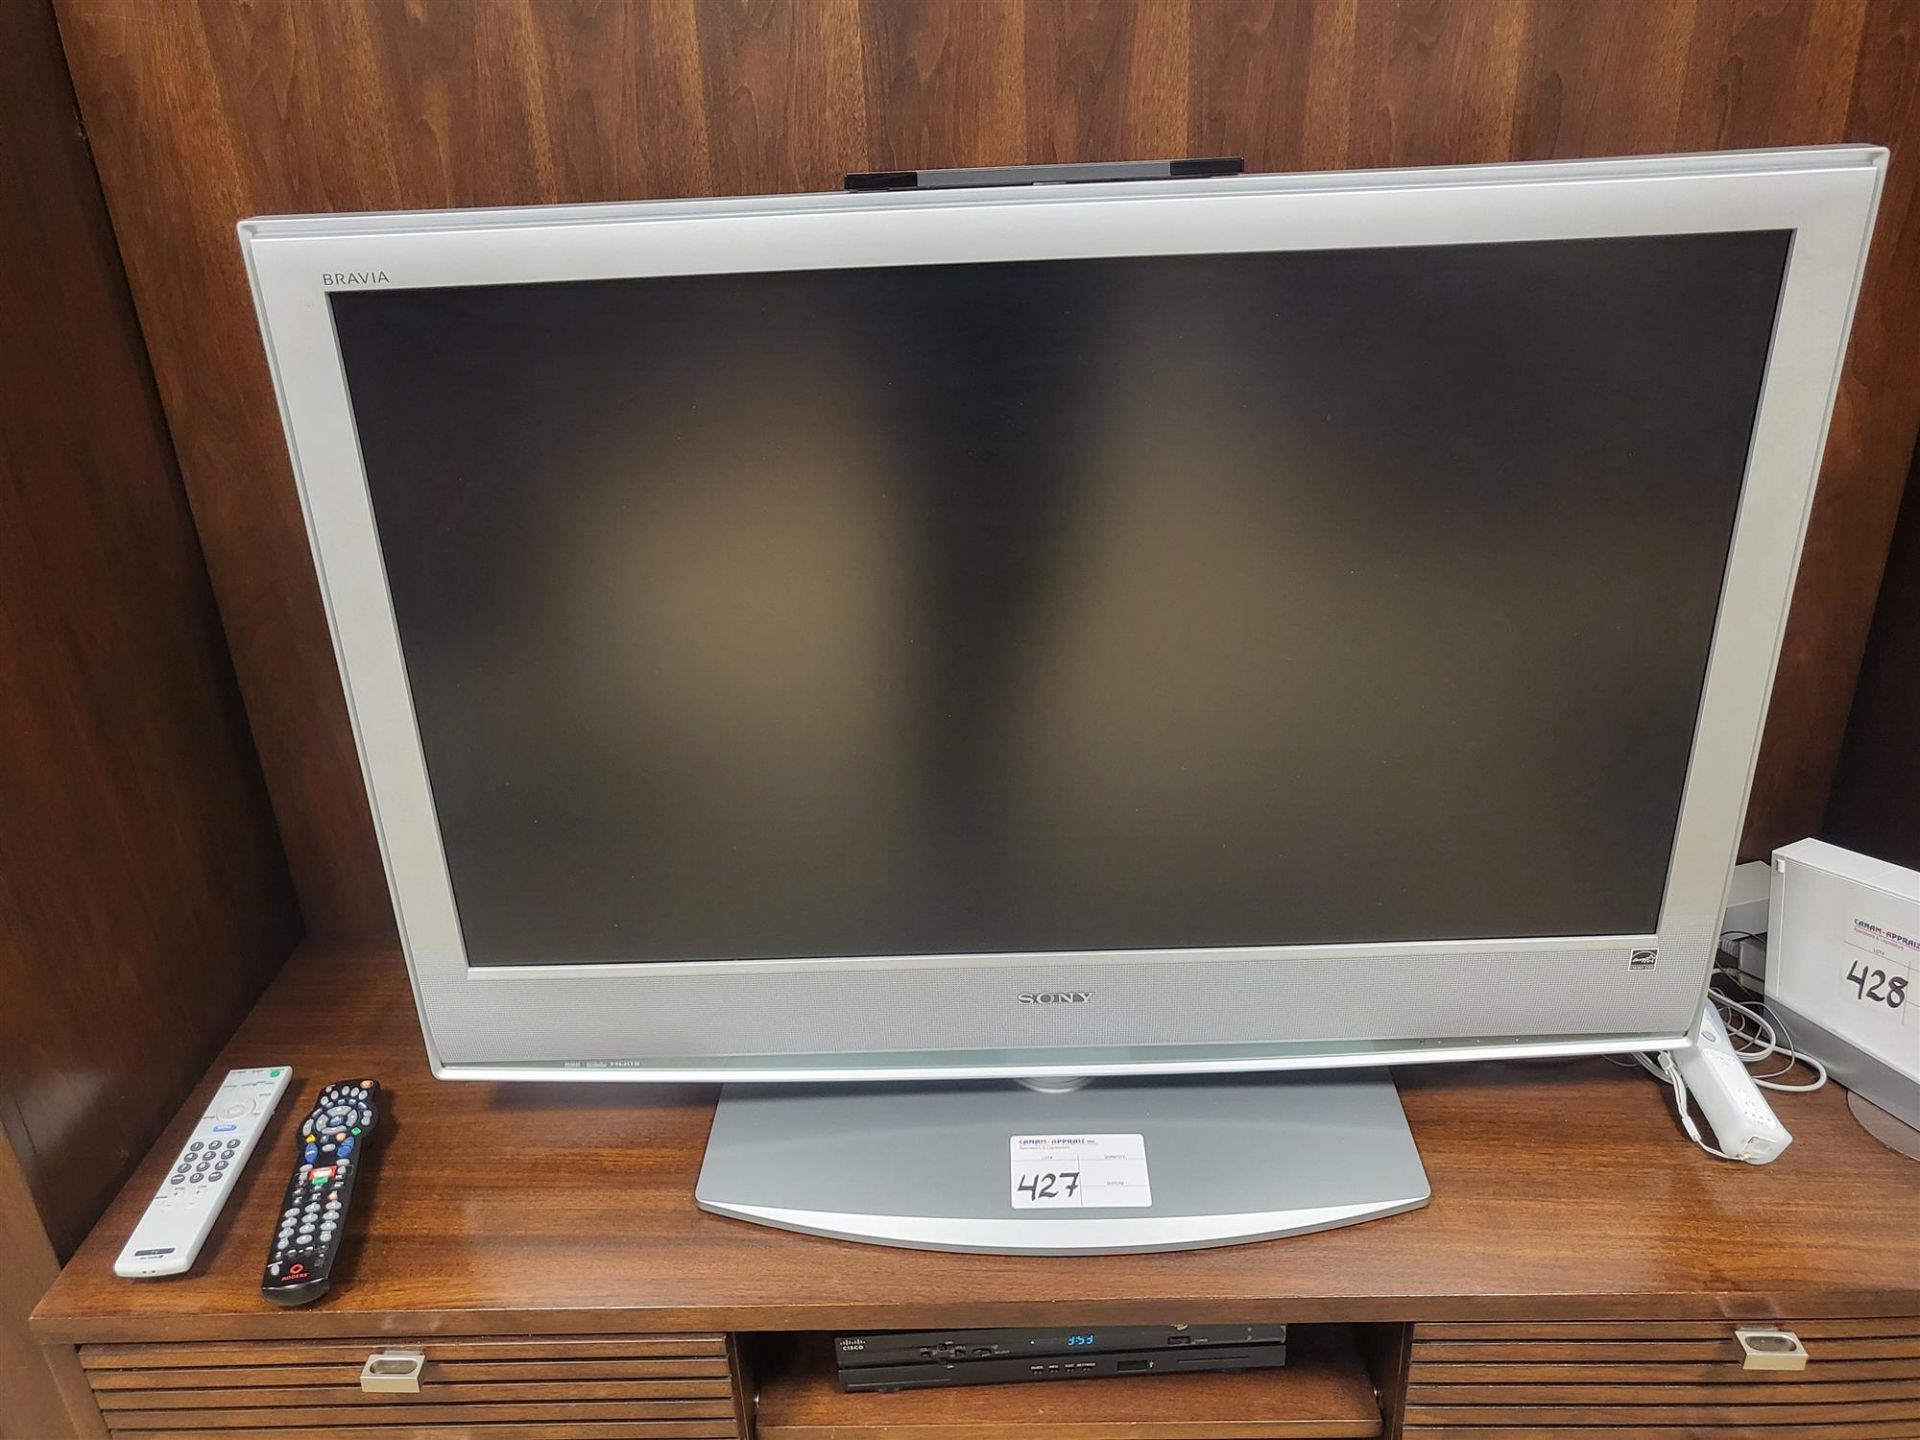 SONY - LCD Color TV - Mo#: KLV-40S200A - Image 2 of 3